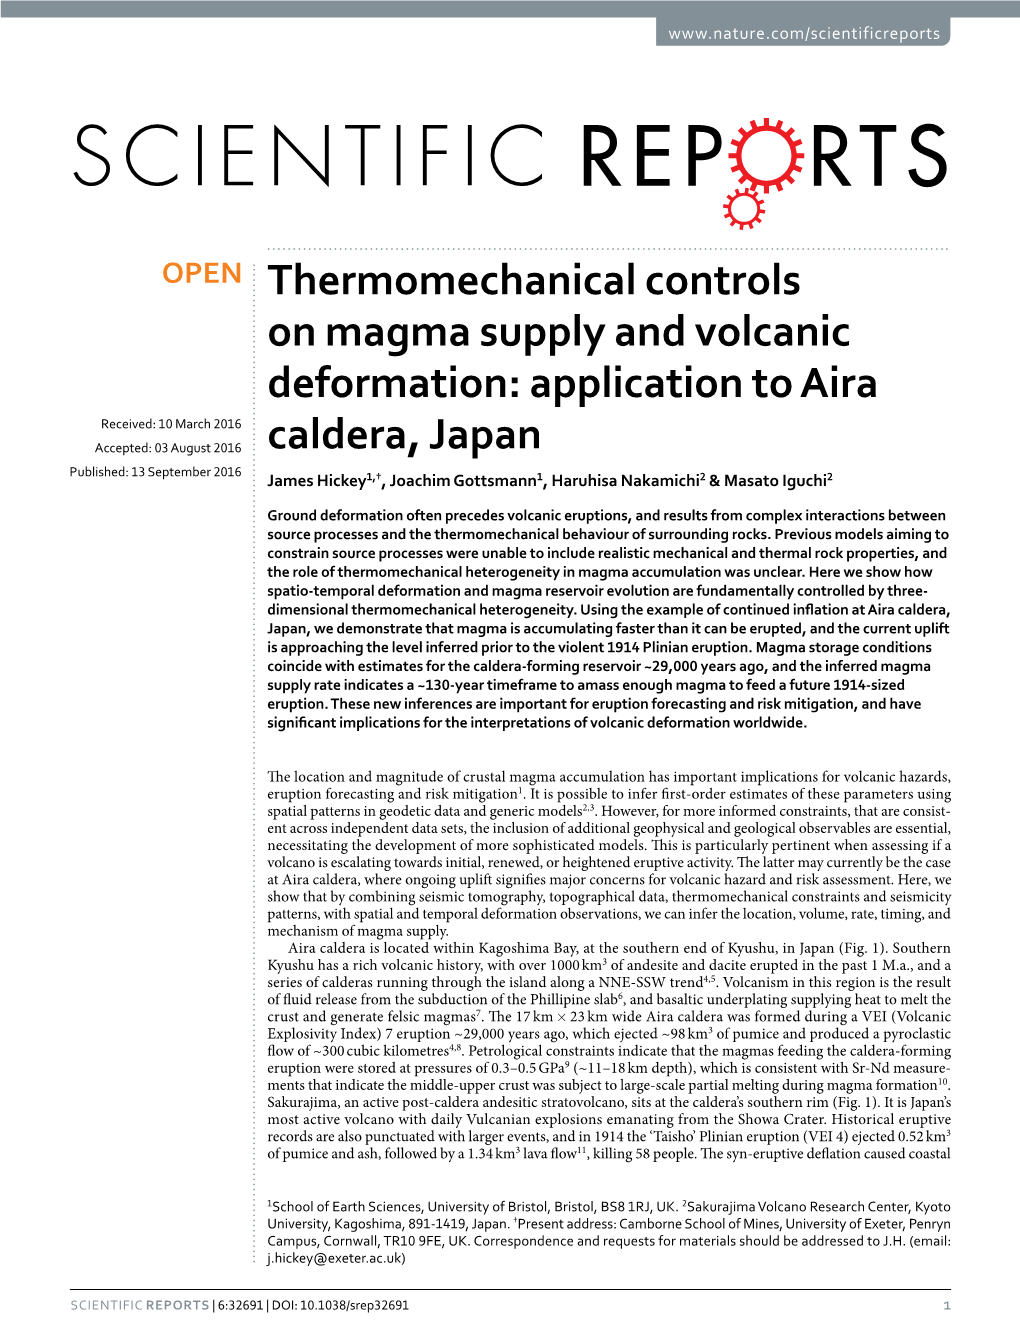 Thermomechanical Controls on Magma Supply And